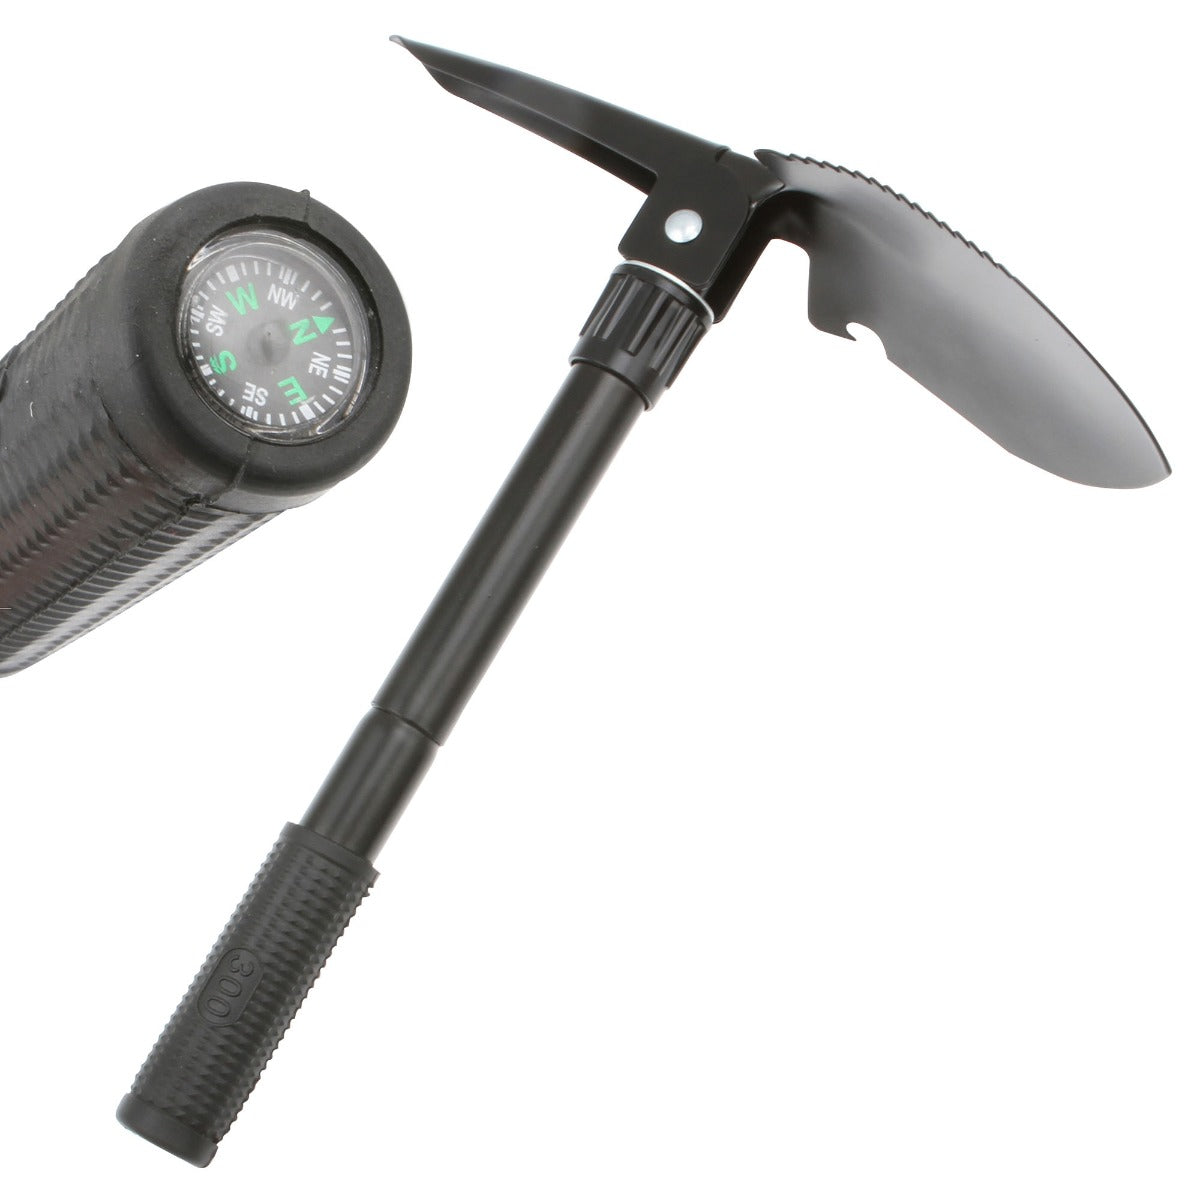 MULTI PURPOSE CAMP TOOL WITH SHOVEL PICK and COMPASS